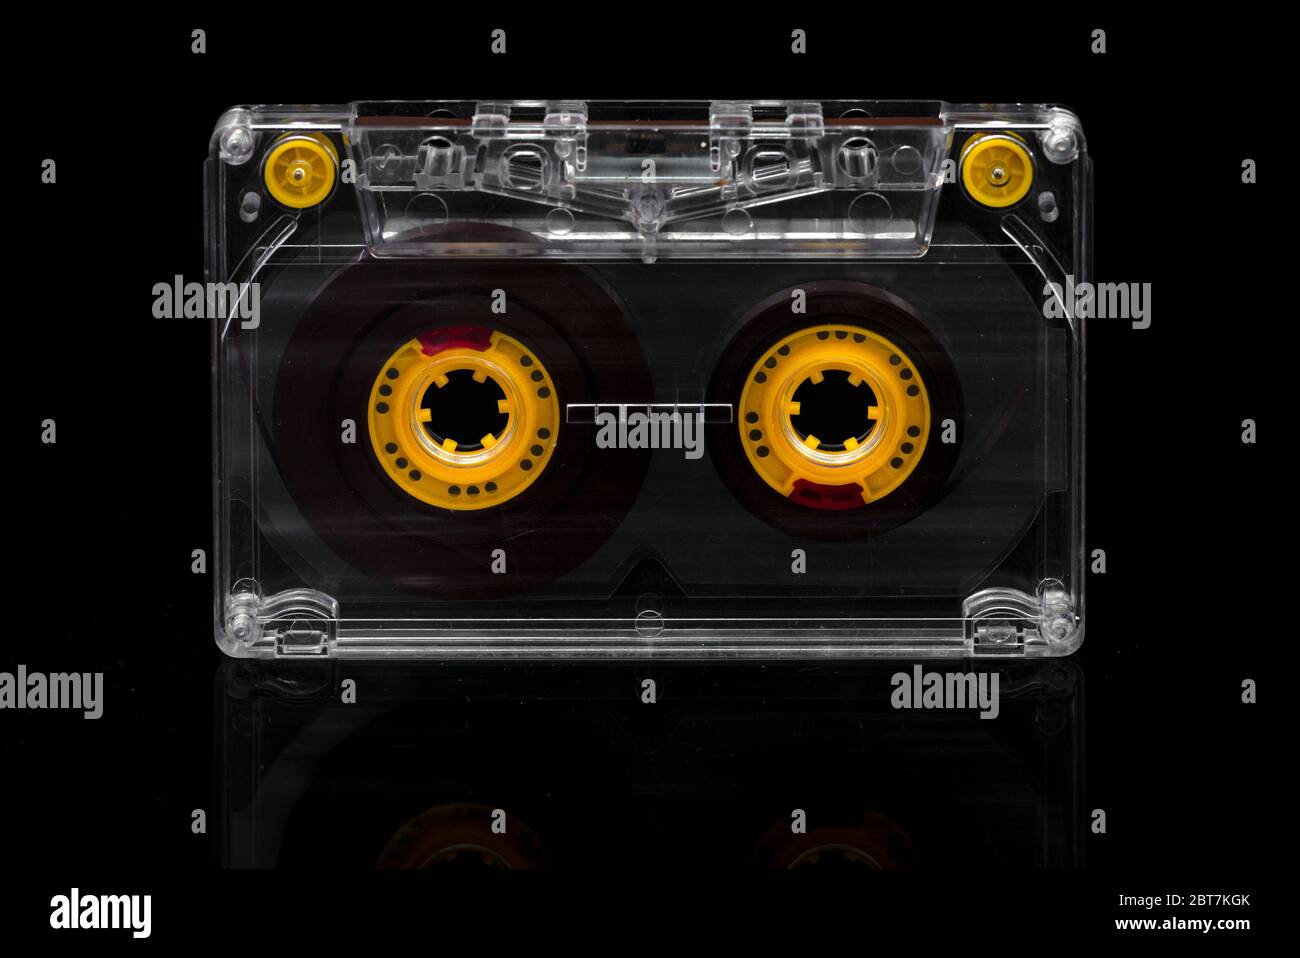 Audio cassette tape with yellow tape reels and tape guides on black background Stock Photo